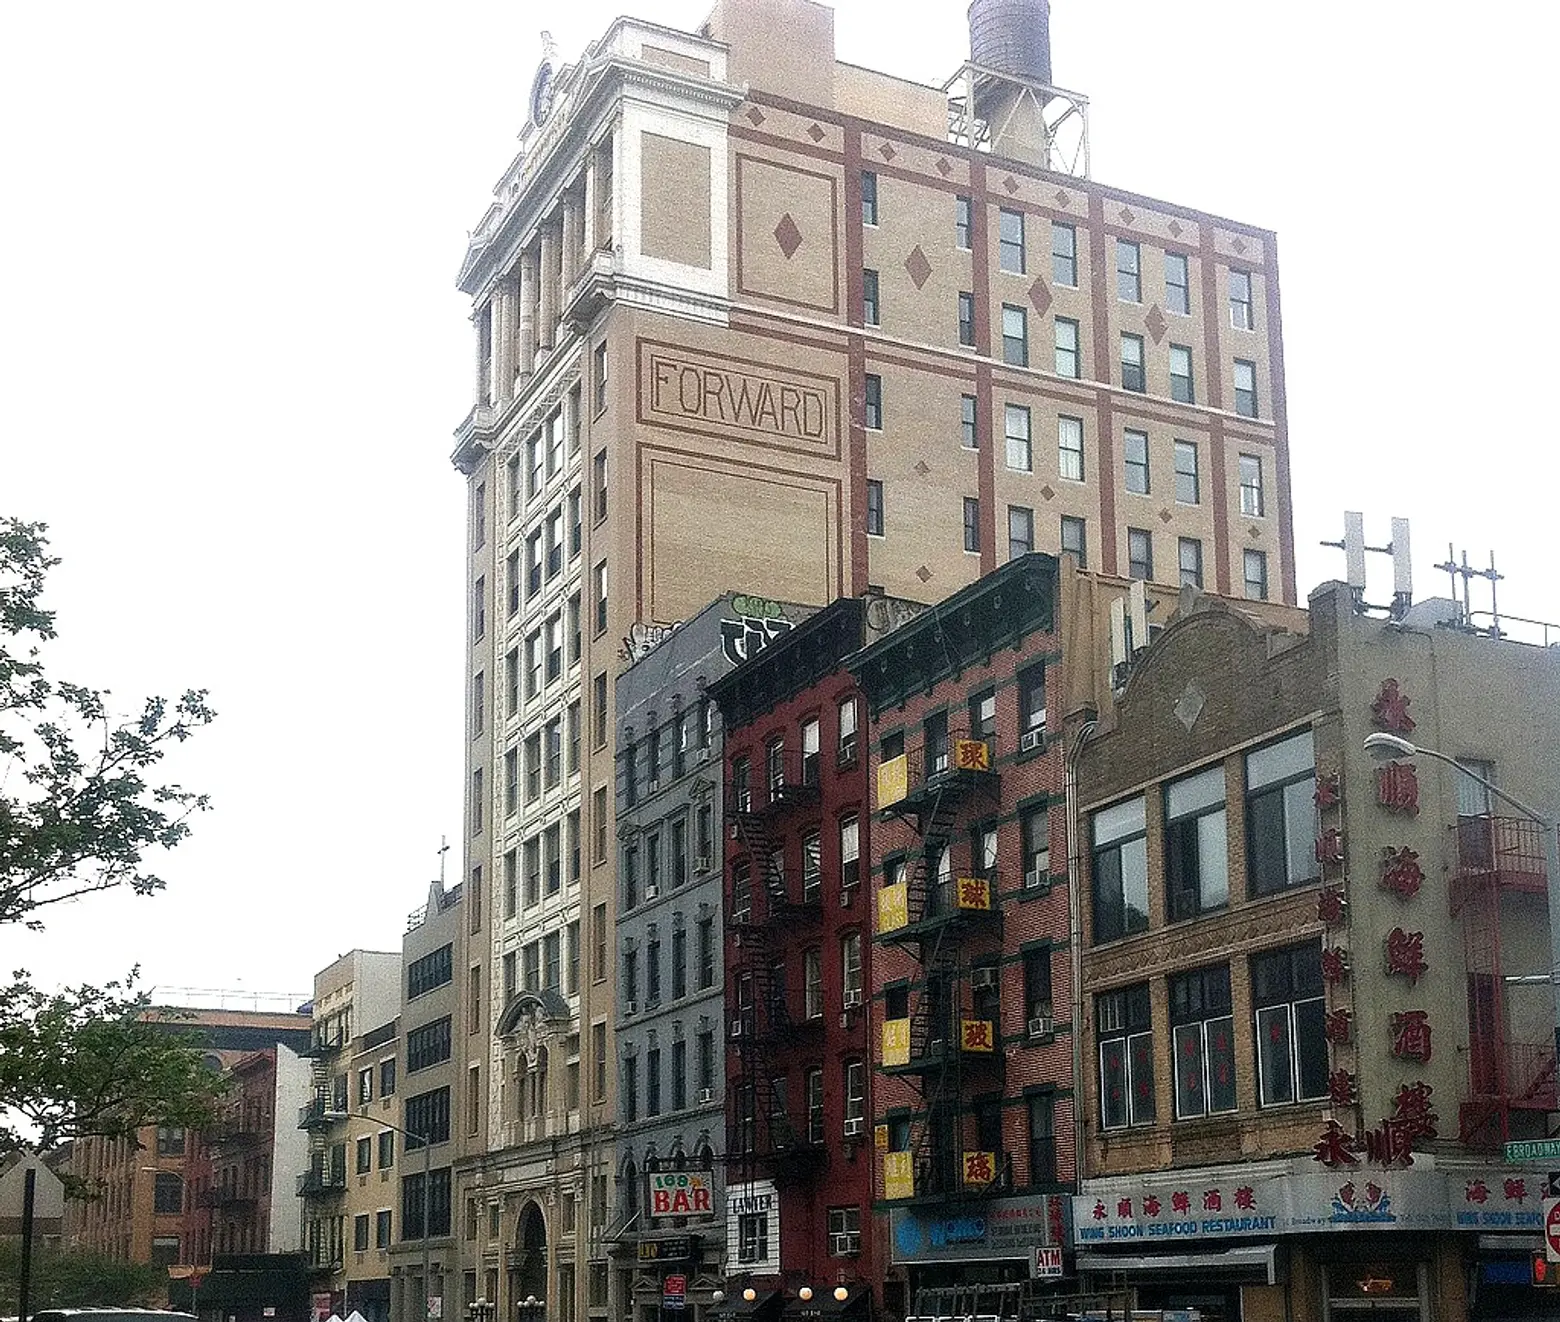 East Broadway, Chinatown, Jewish Daily Forward Building